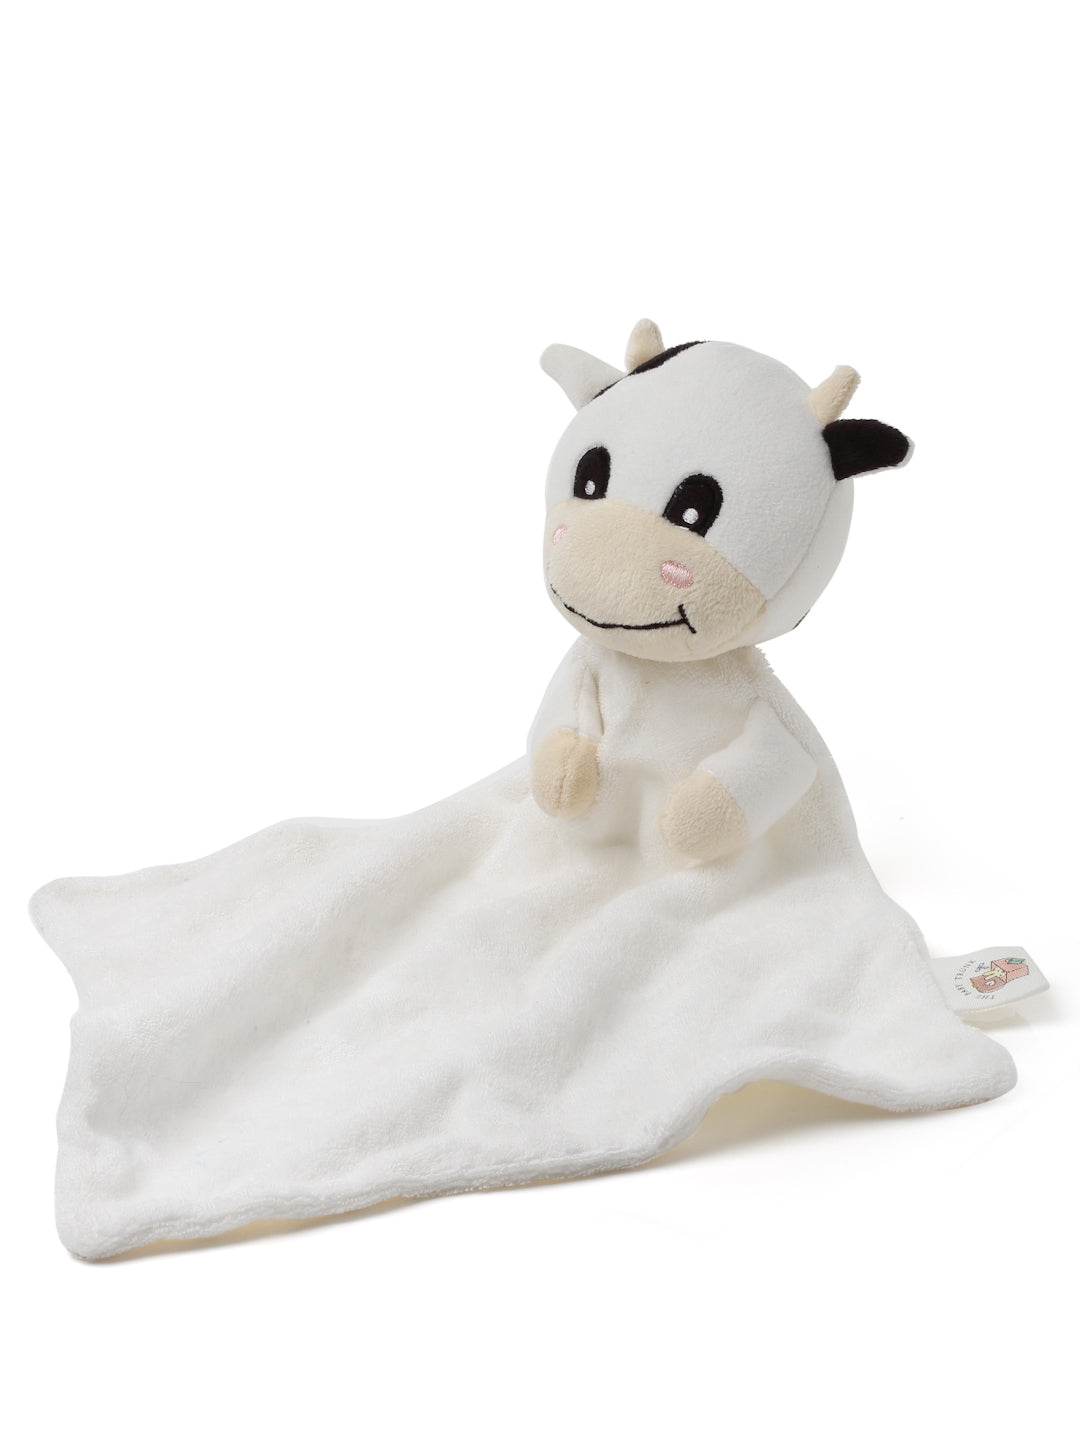 Cow Security blanket toy